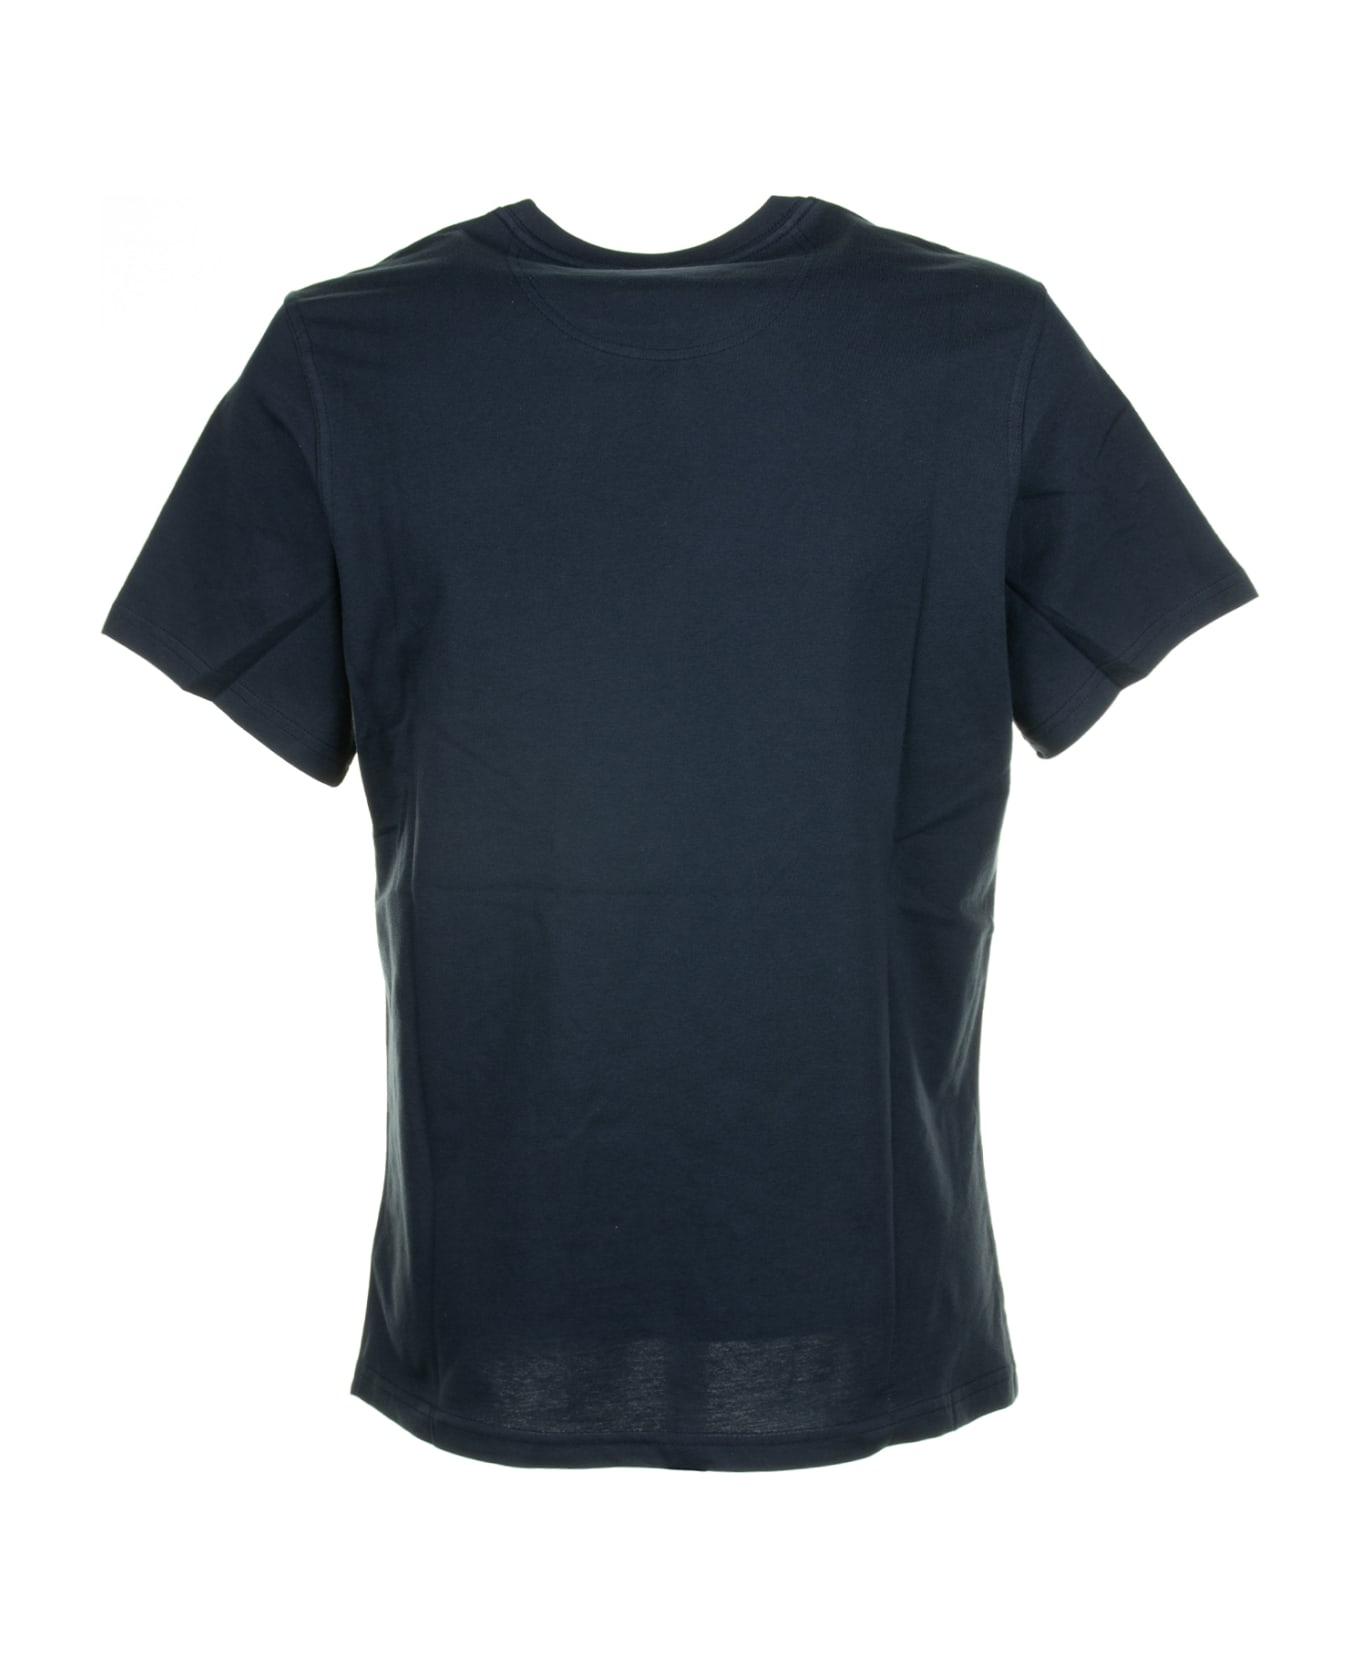 Barbour Navy Blue T-shirt With Pocket And Logo - NAVY シャツ